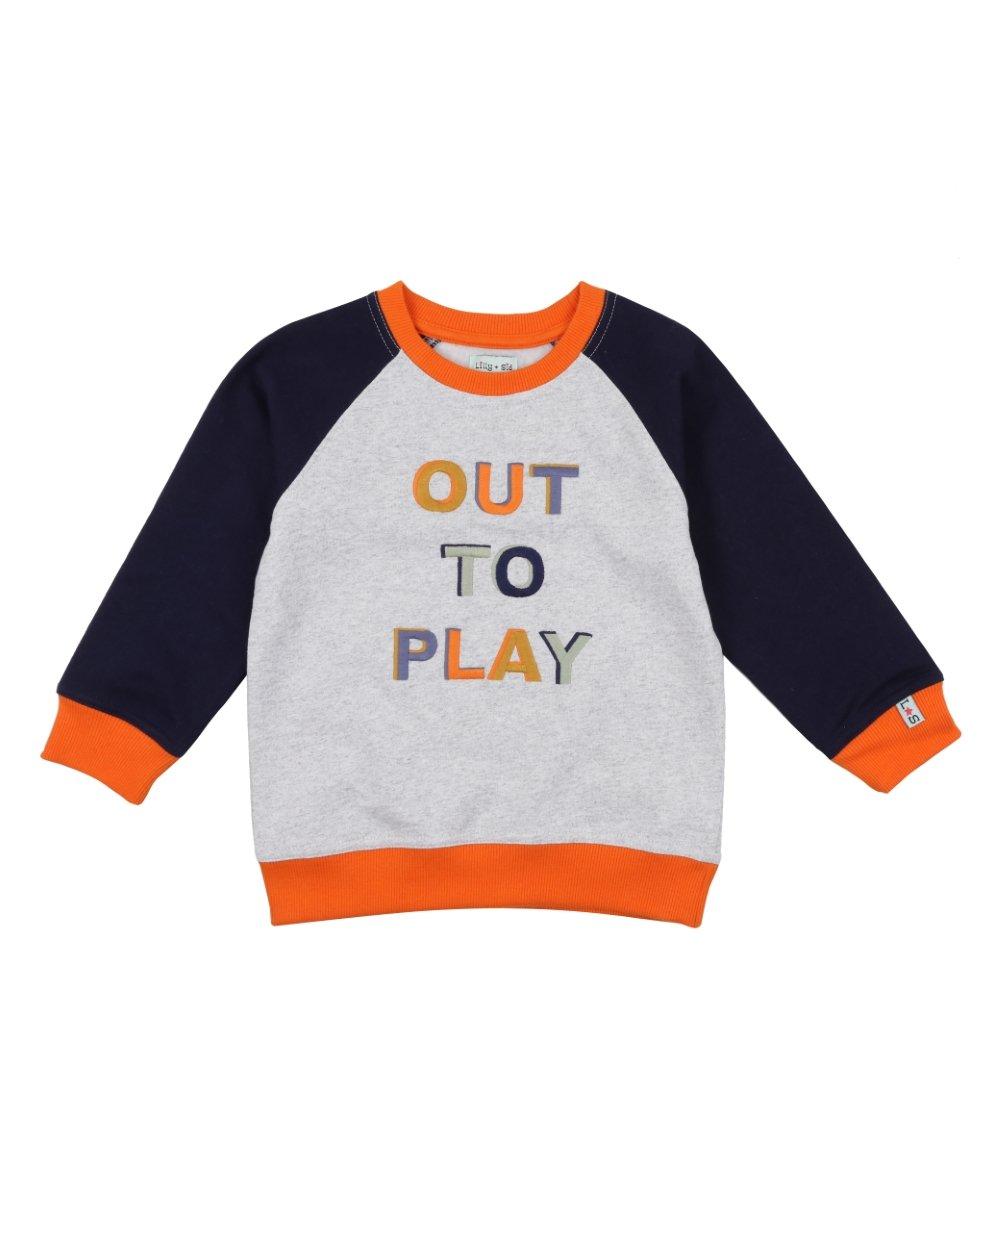 Out to Play Sweatshirt